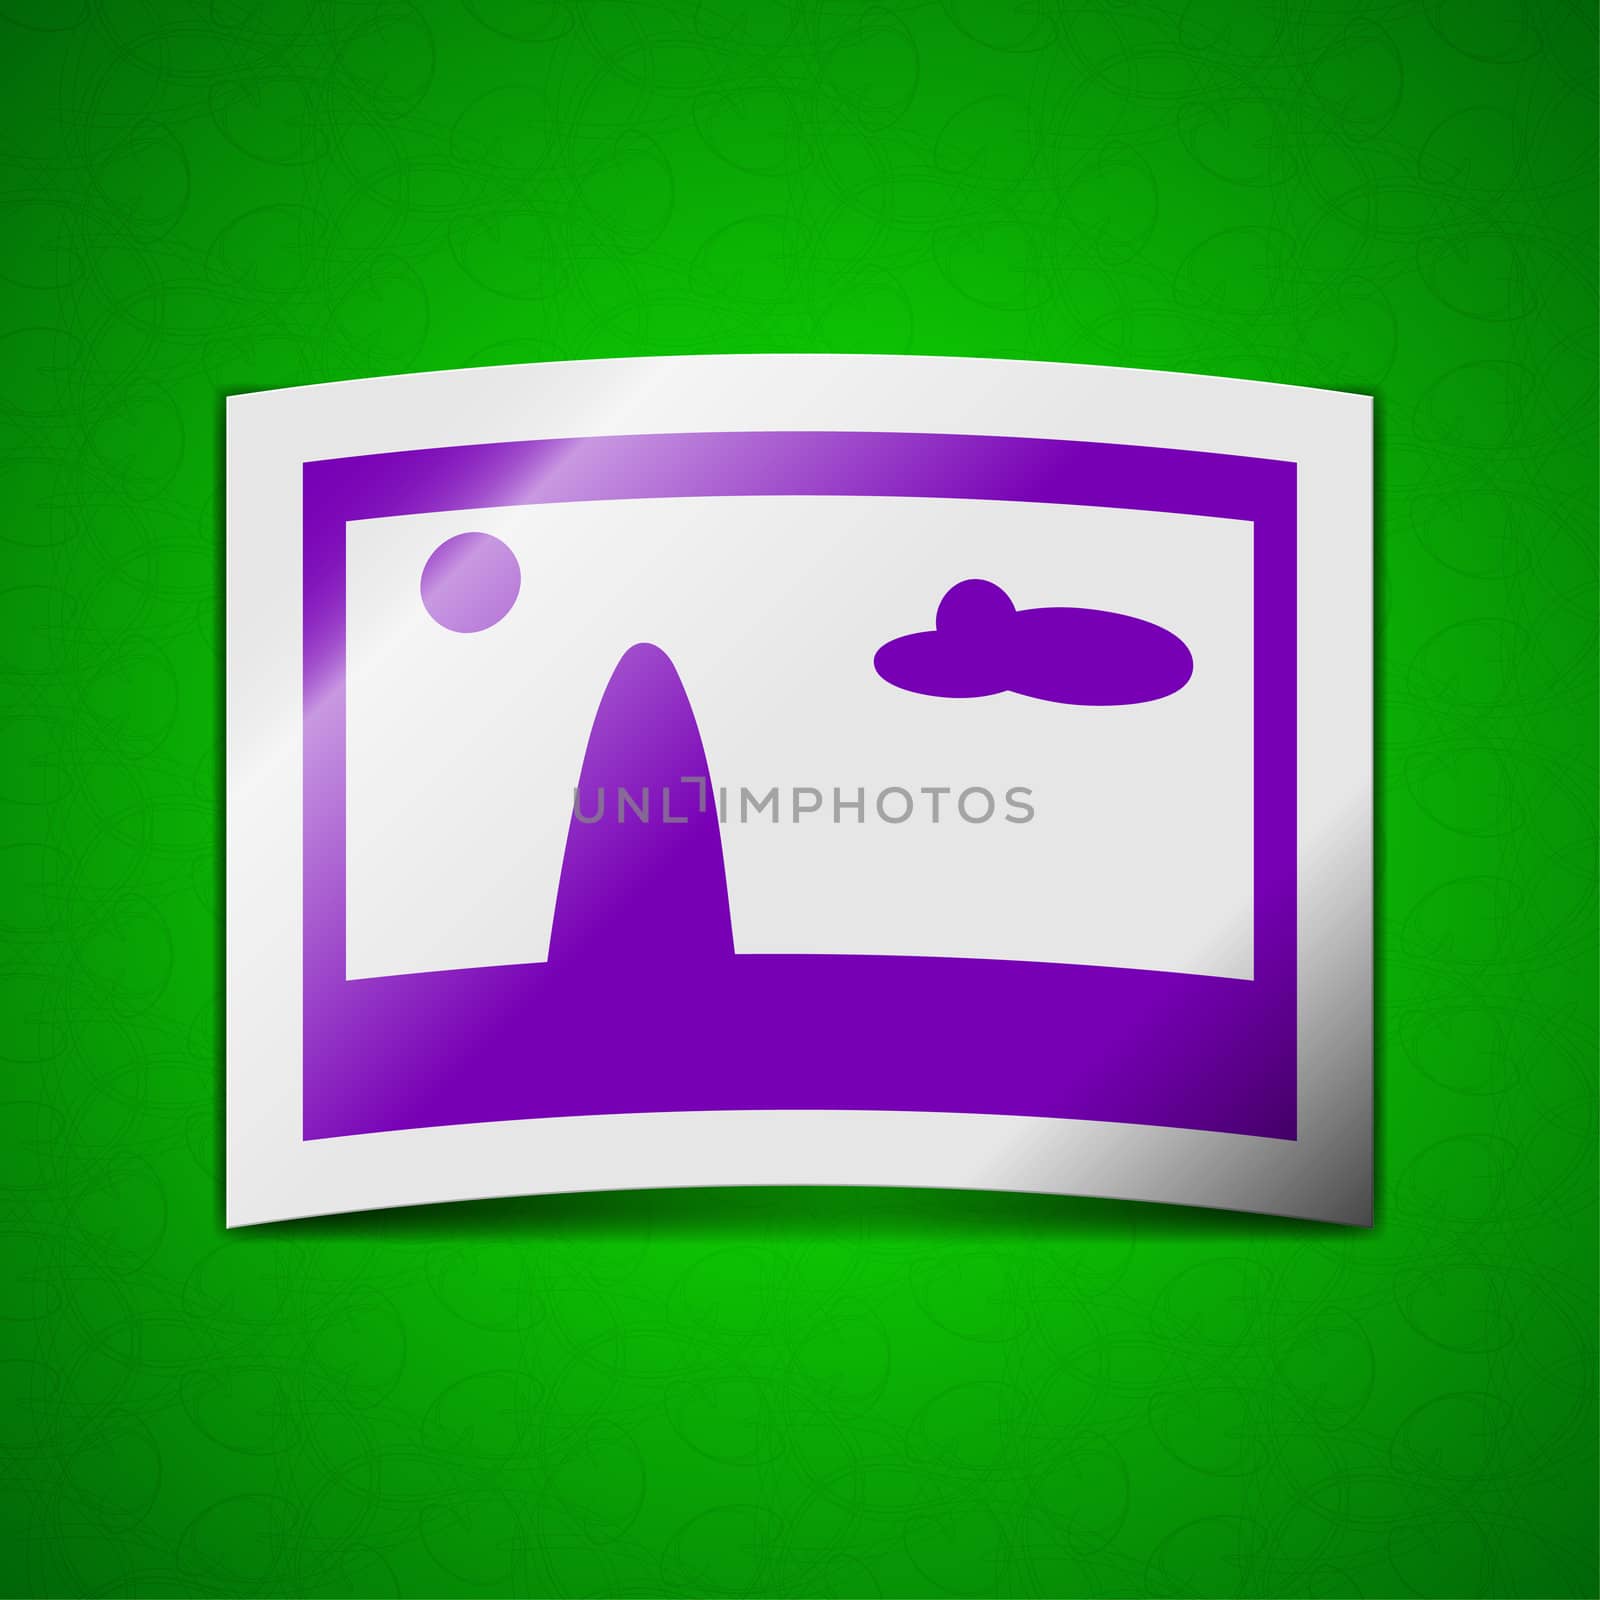 File JPG icon sign. Symbol chic colored sticky label on green background.  illustration